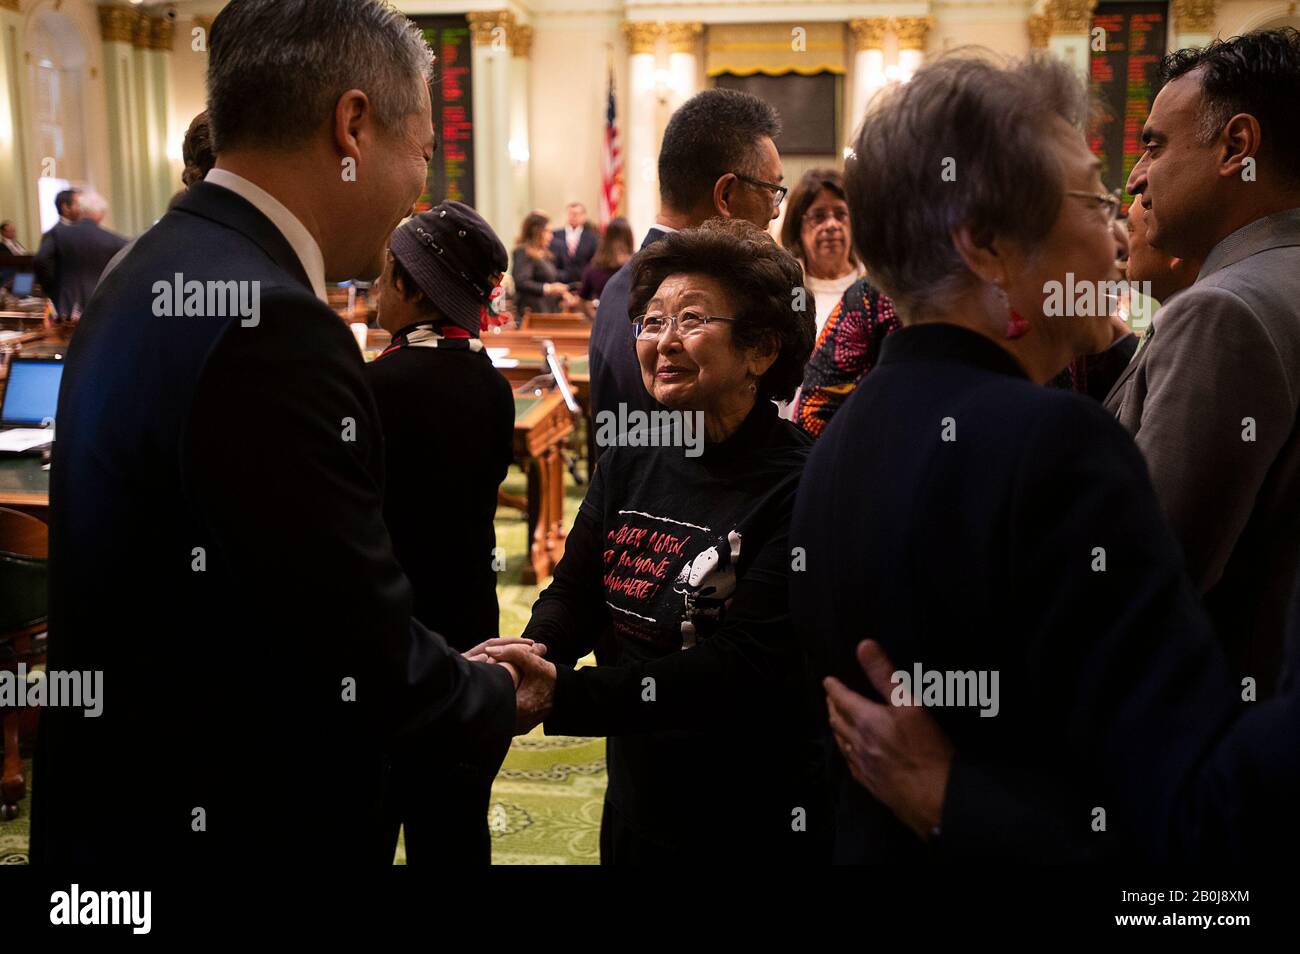 Sacramento, CA, USA. 20th Feb, 2020. Assemblyman Al Muratsuchi greets Marielee Tsukamoto in after the passing of after HR77 that spells out in excruciating detail CaliforniaÃs anti-Japanese heritage and is passed at the State Capital on Thursday, Feb 20, 2020 in Sacramento. On Feb. 19, 1942 President Franklin D. Roosevelt signed Executive Order 9066 that forcibly removed and incarcerated over 110, 00 Japanese Americans into prison camps during WWII. Credit: Paul Kitagaki Jr./ZUMA Wire/Alamy Live News Stock Photo